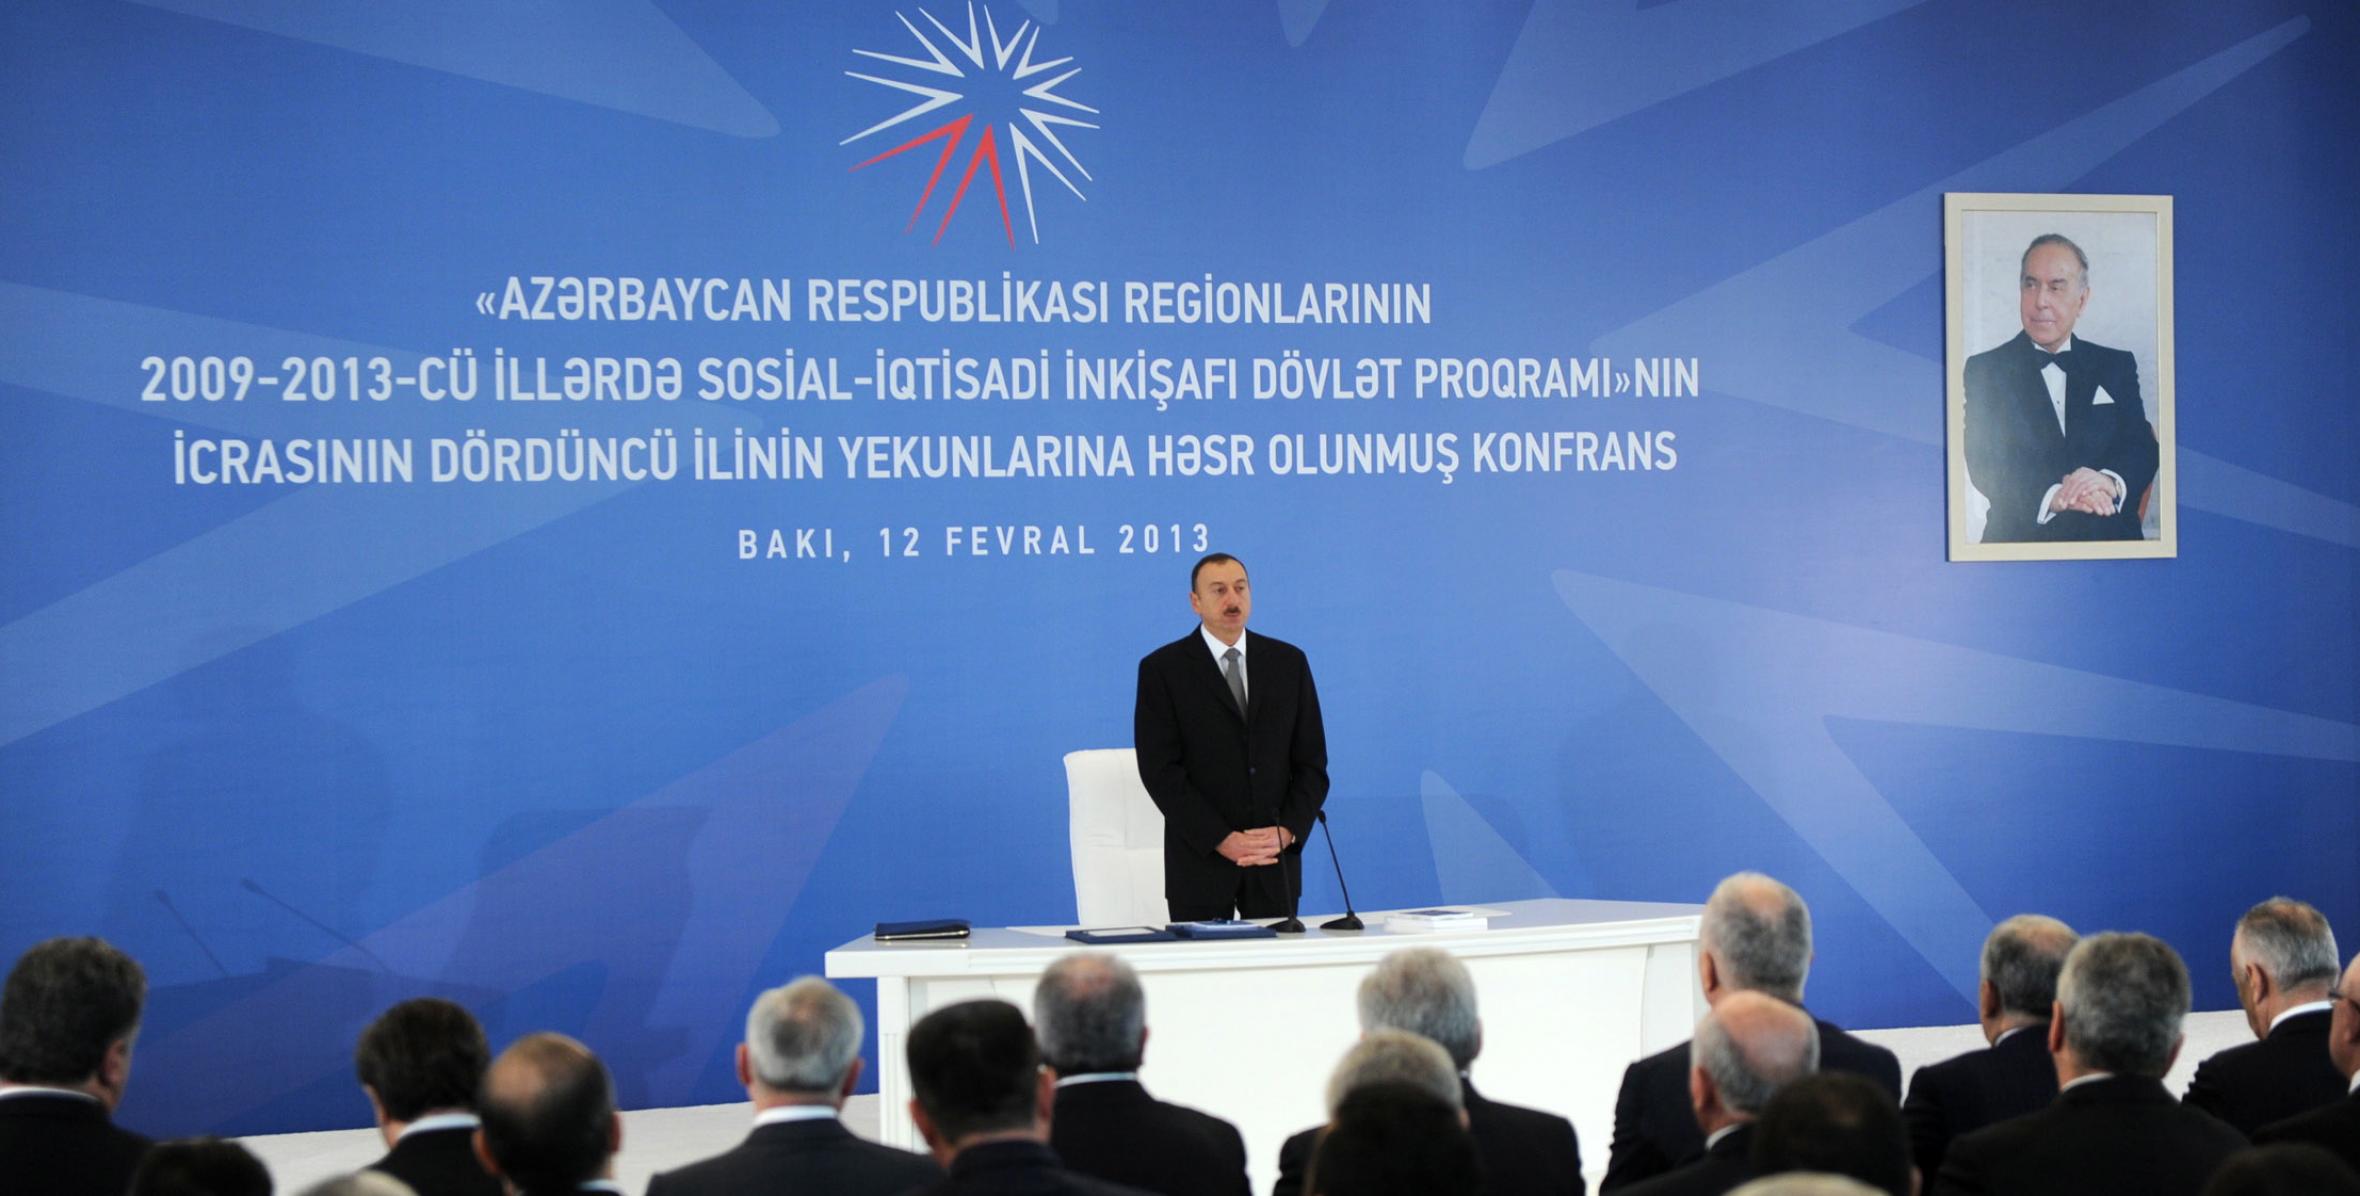 Opening speech by Ilham Aliyev at the conference dedicated to the results of the fourth year of the “State Program on the socioeconomic development of districts of the Republic of Azerbaijan in 2009-2013”